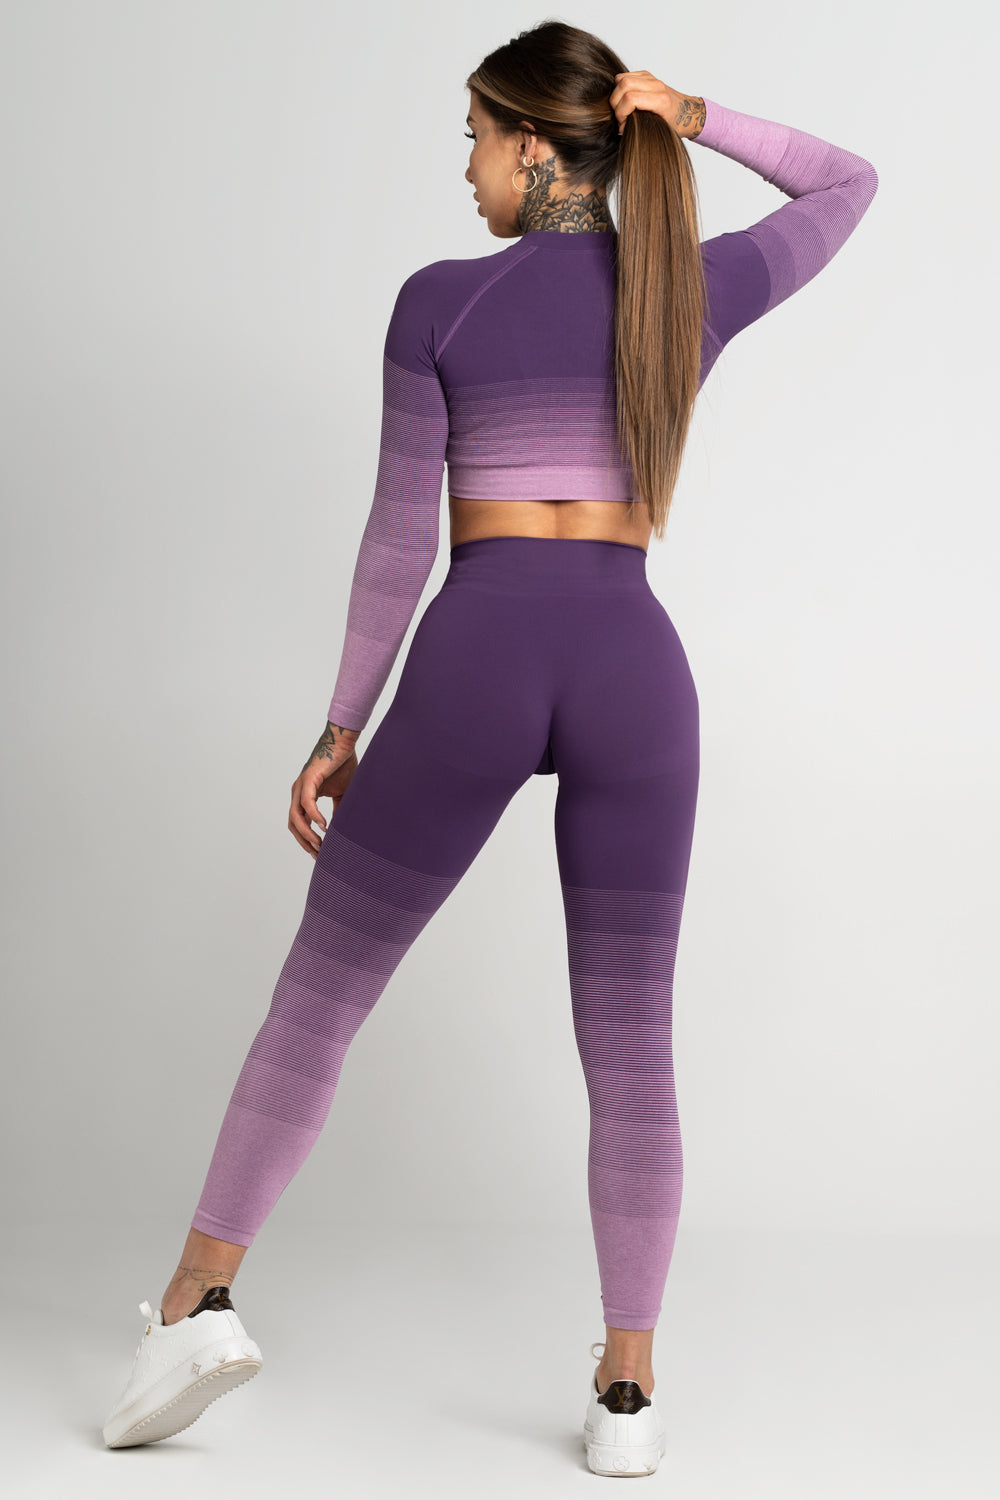 All About the Ombre Active Leggings – ICONOFLASH